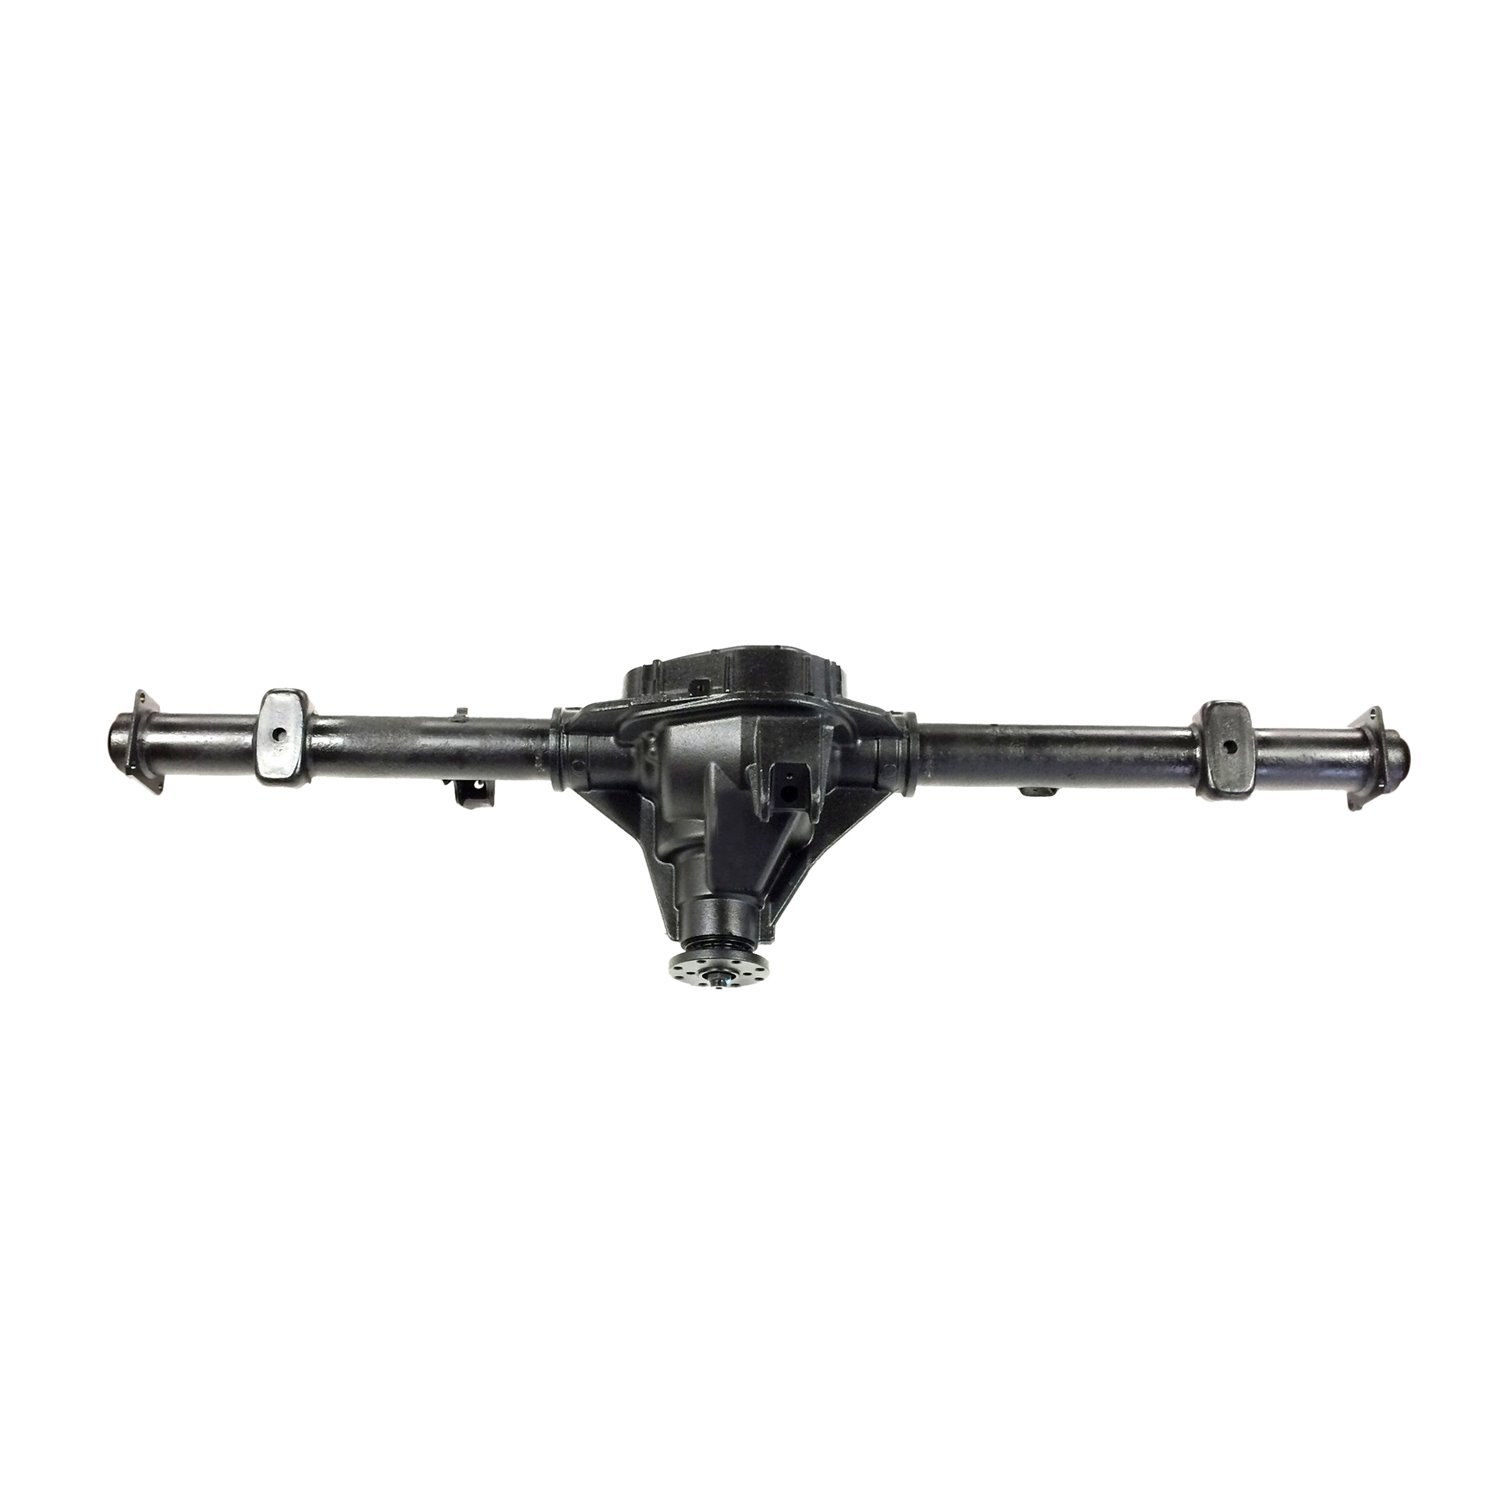 Remanufactured Complete Axle Assembly for Ford 9.75" 12-13 Ford F150 3.73 Ratio, 6 Lug